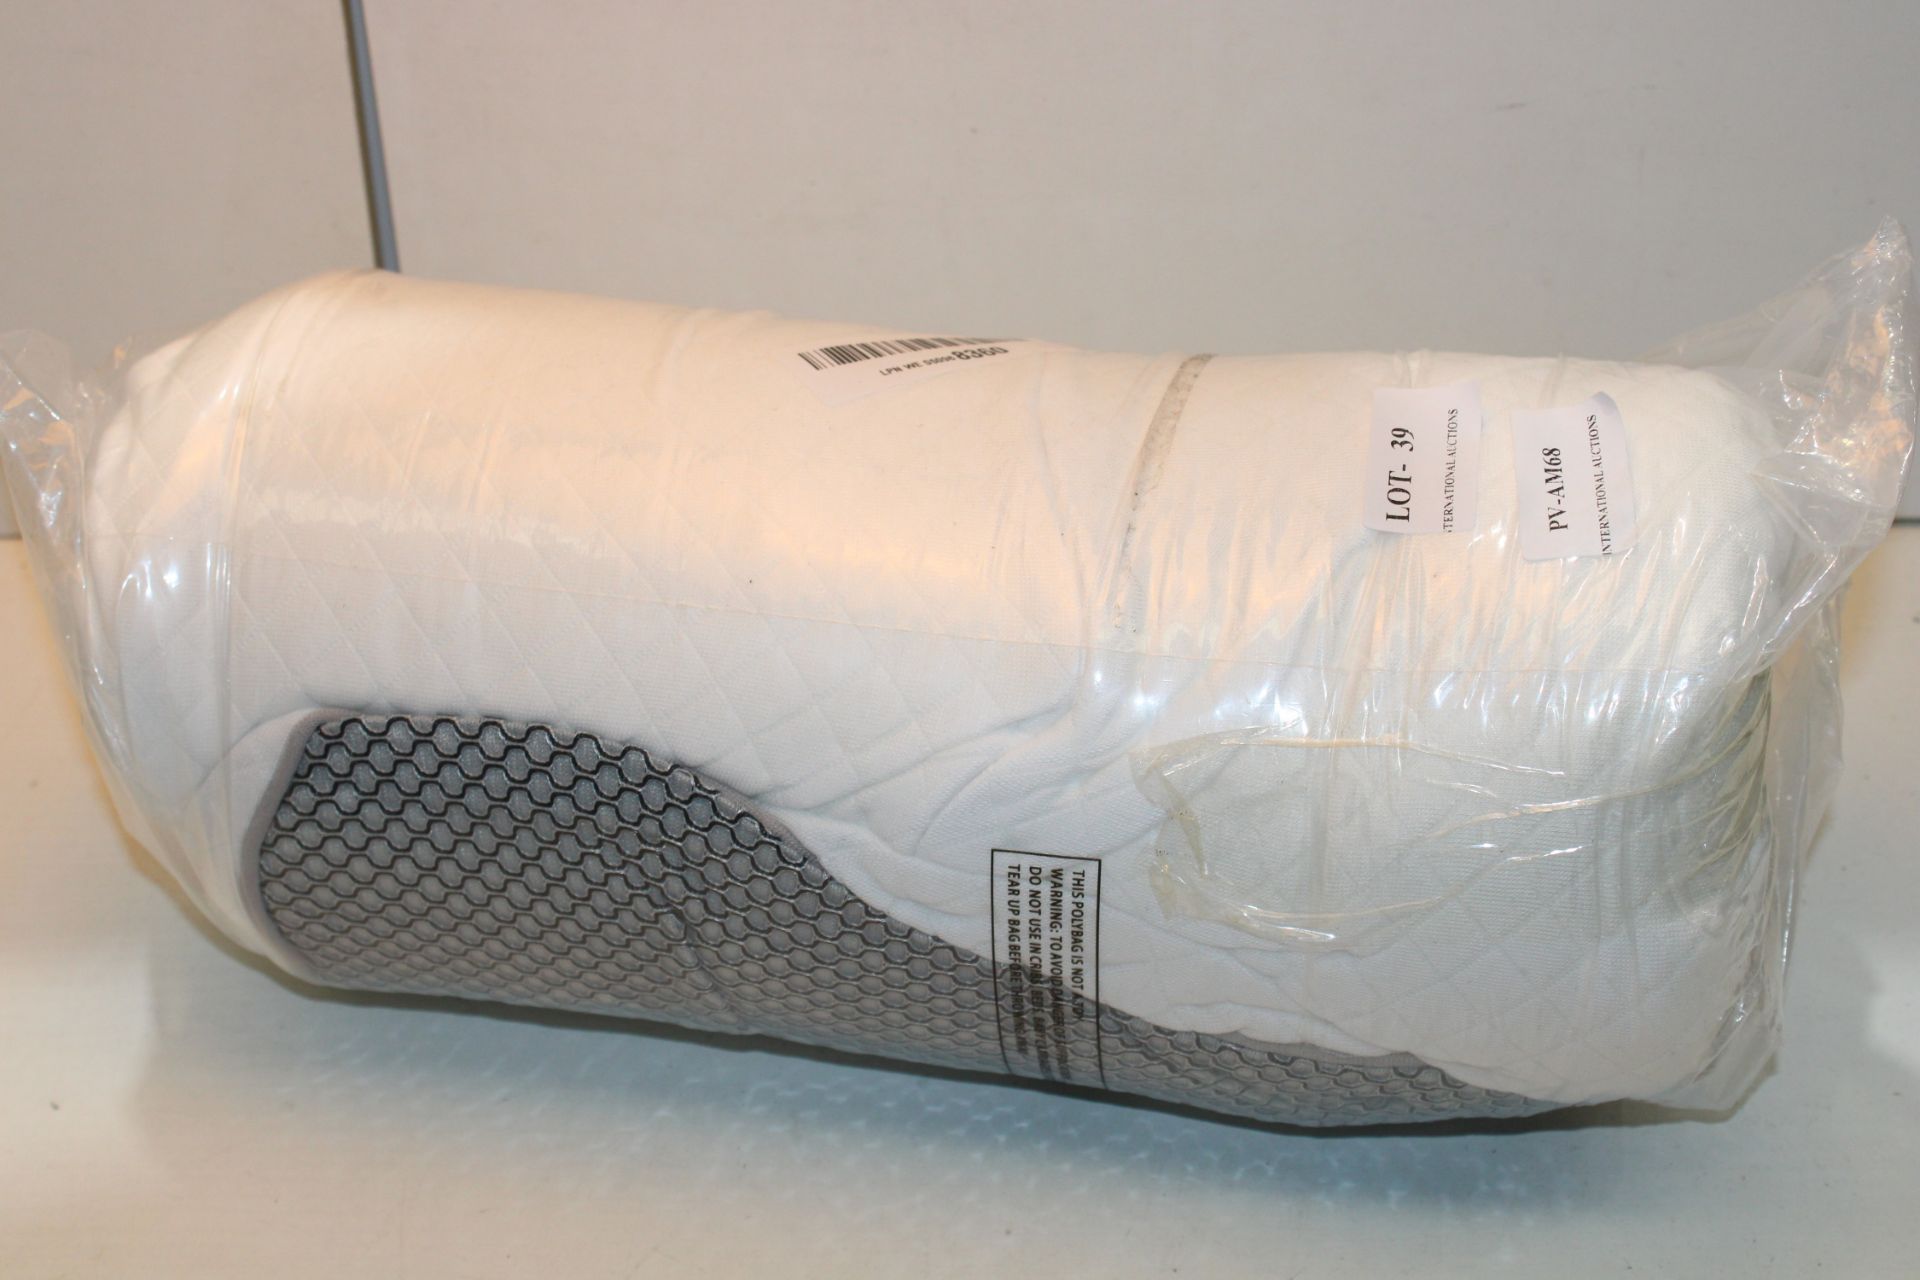 MEMORY FOAM PILLOW Condition ReportAppraisal Available on Request- All Items are Unchecked/